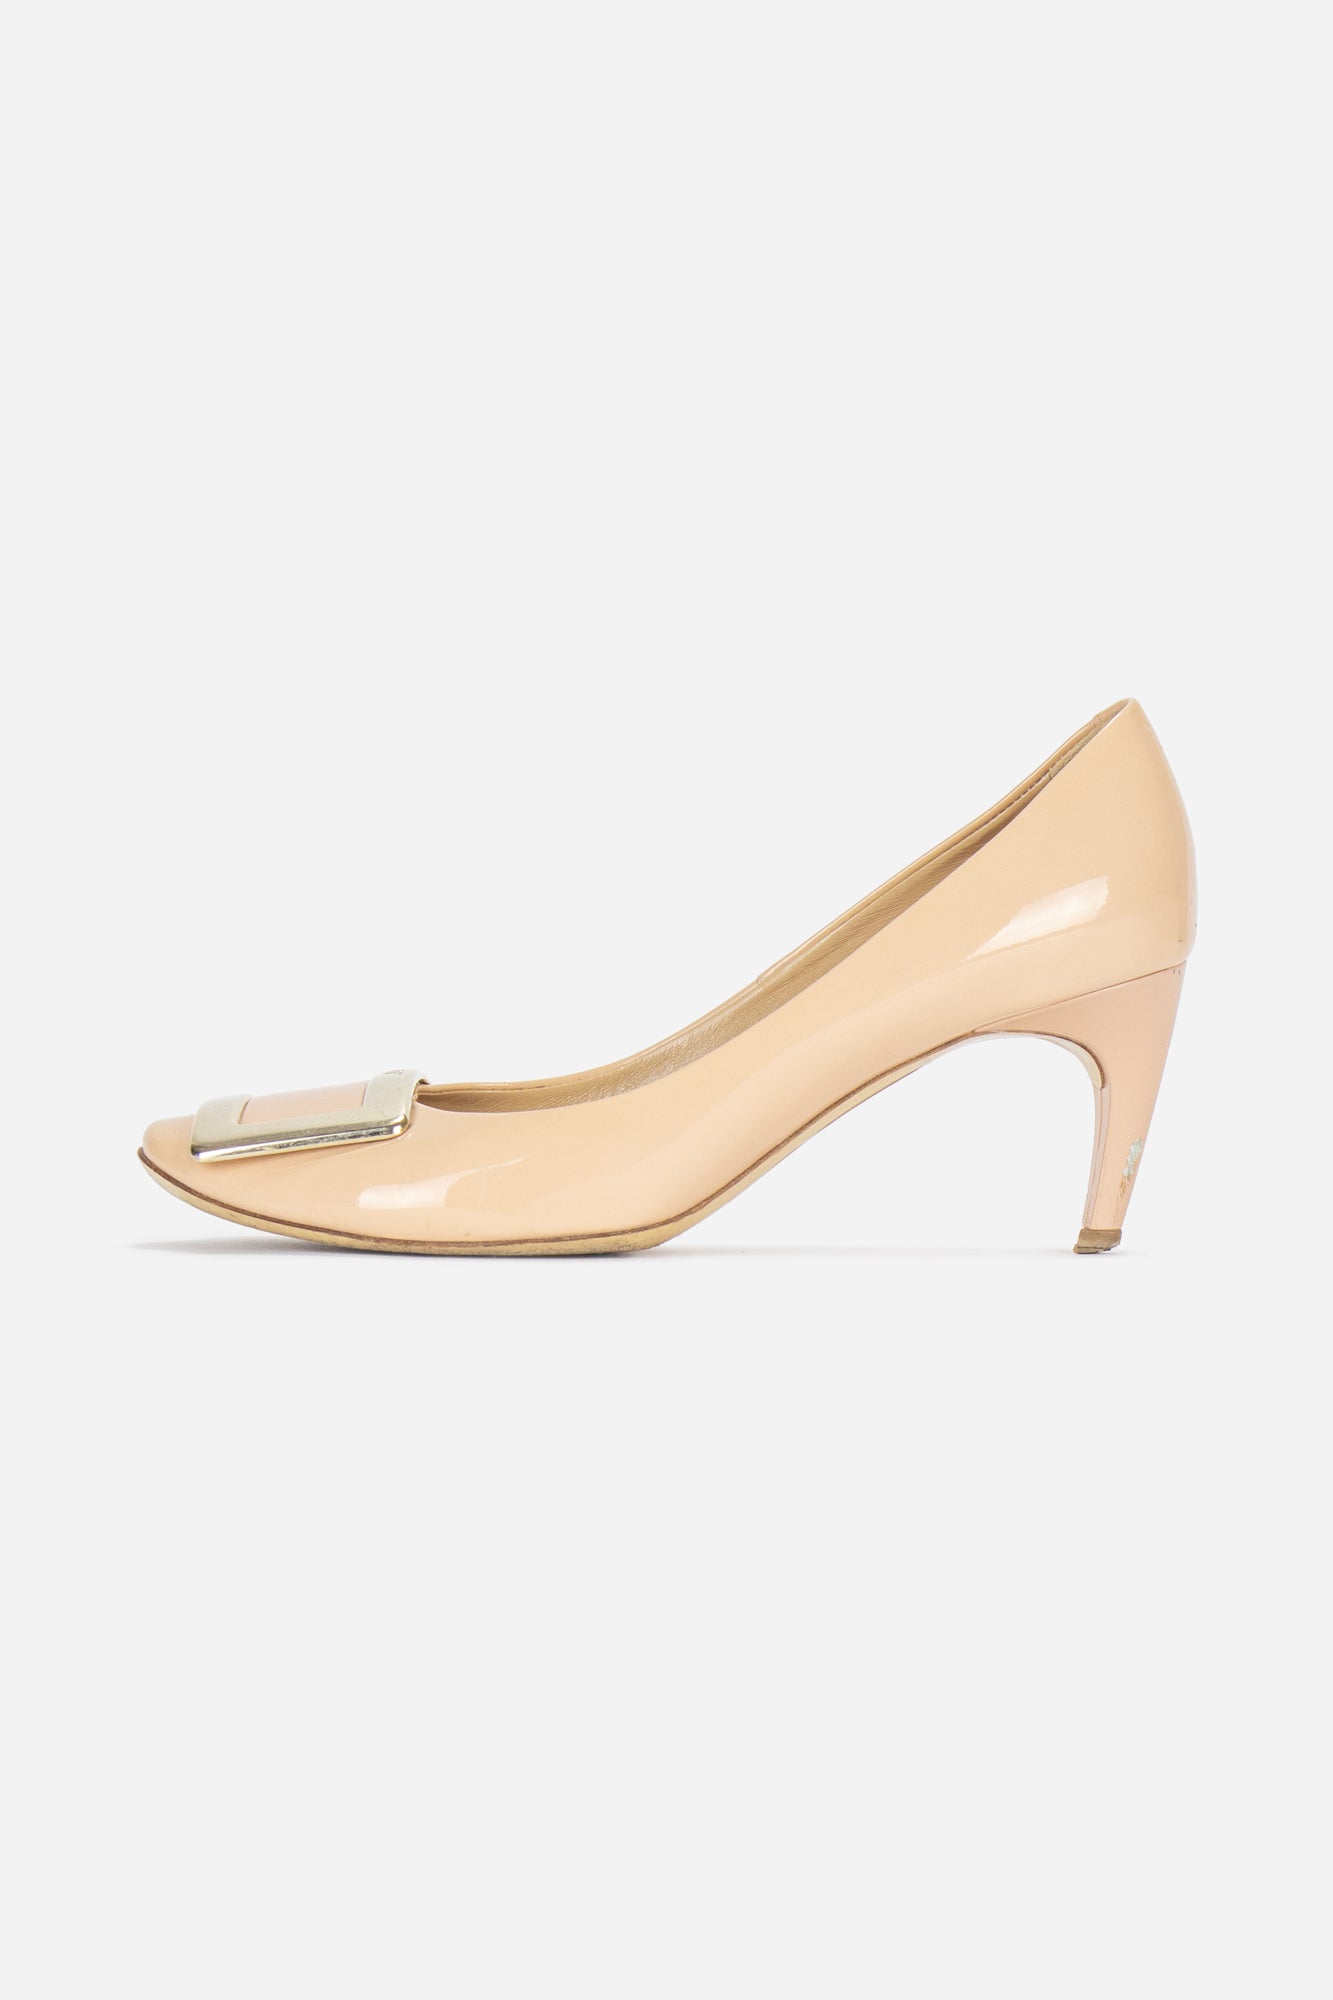 Nude Patent Leather Classic Pumps